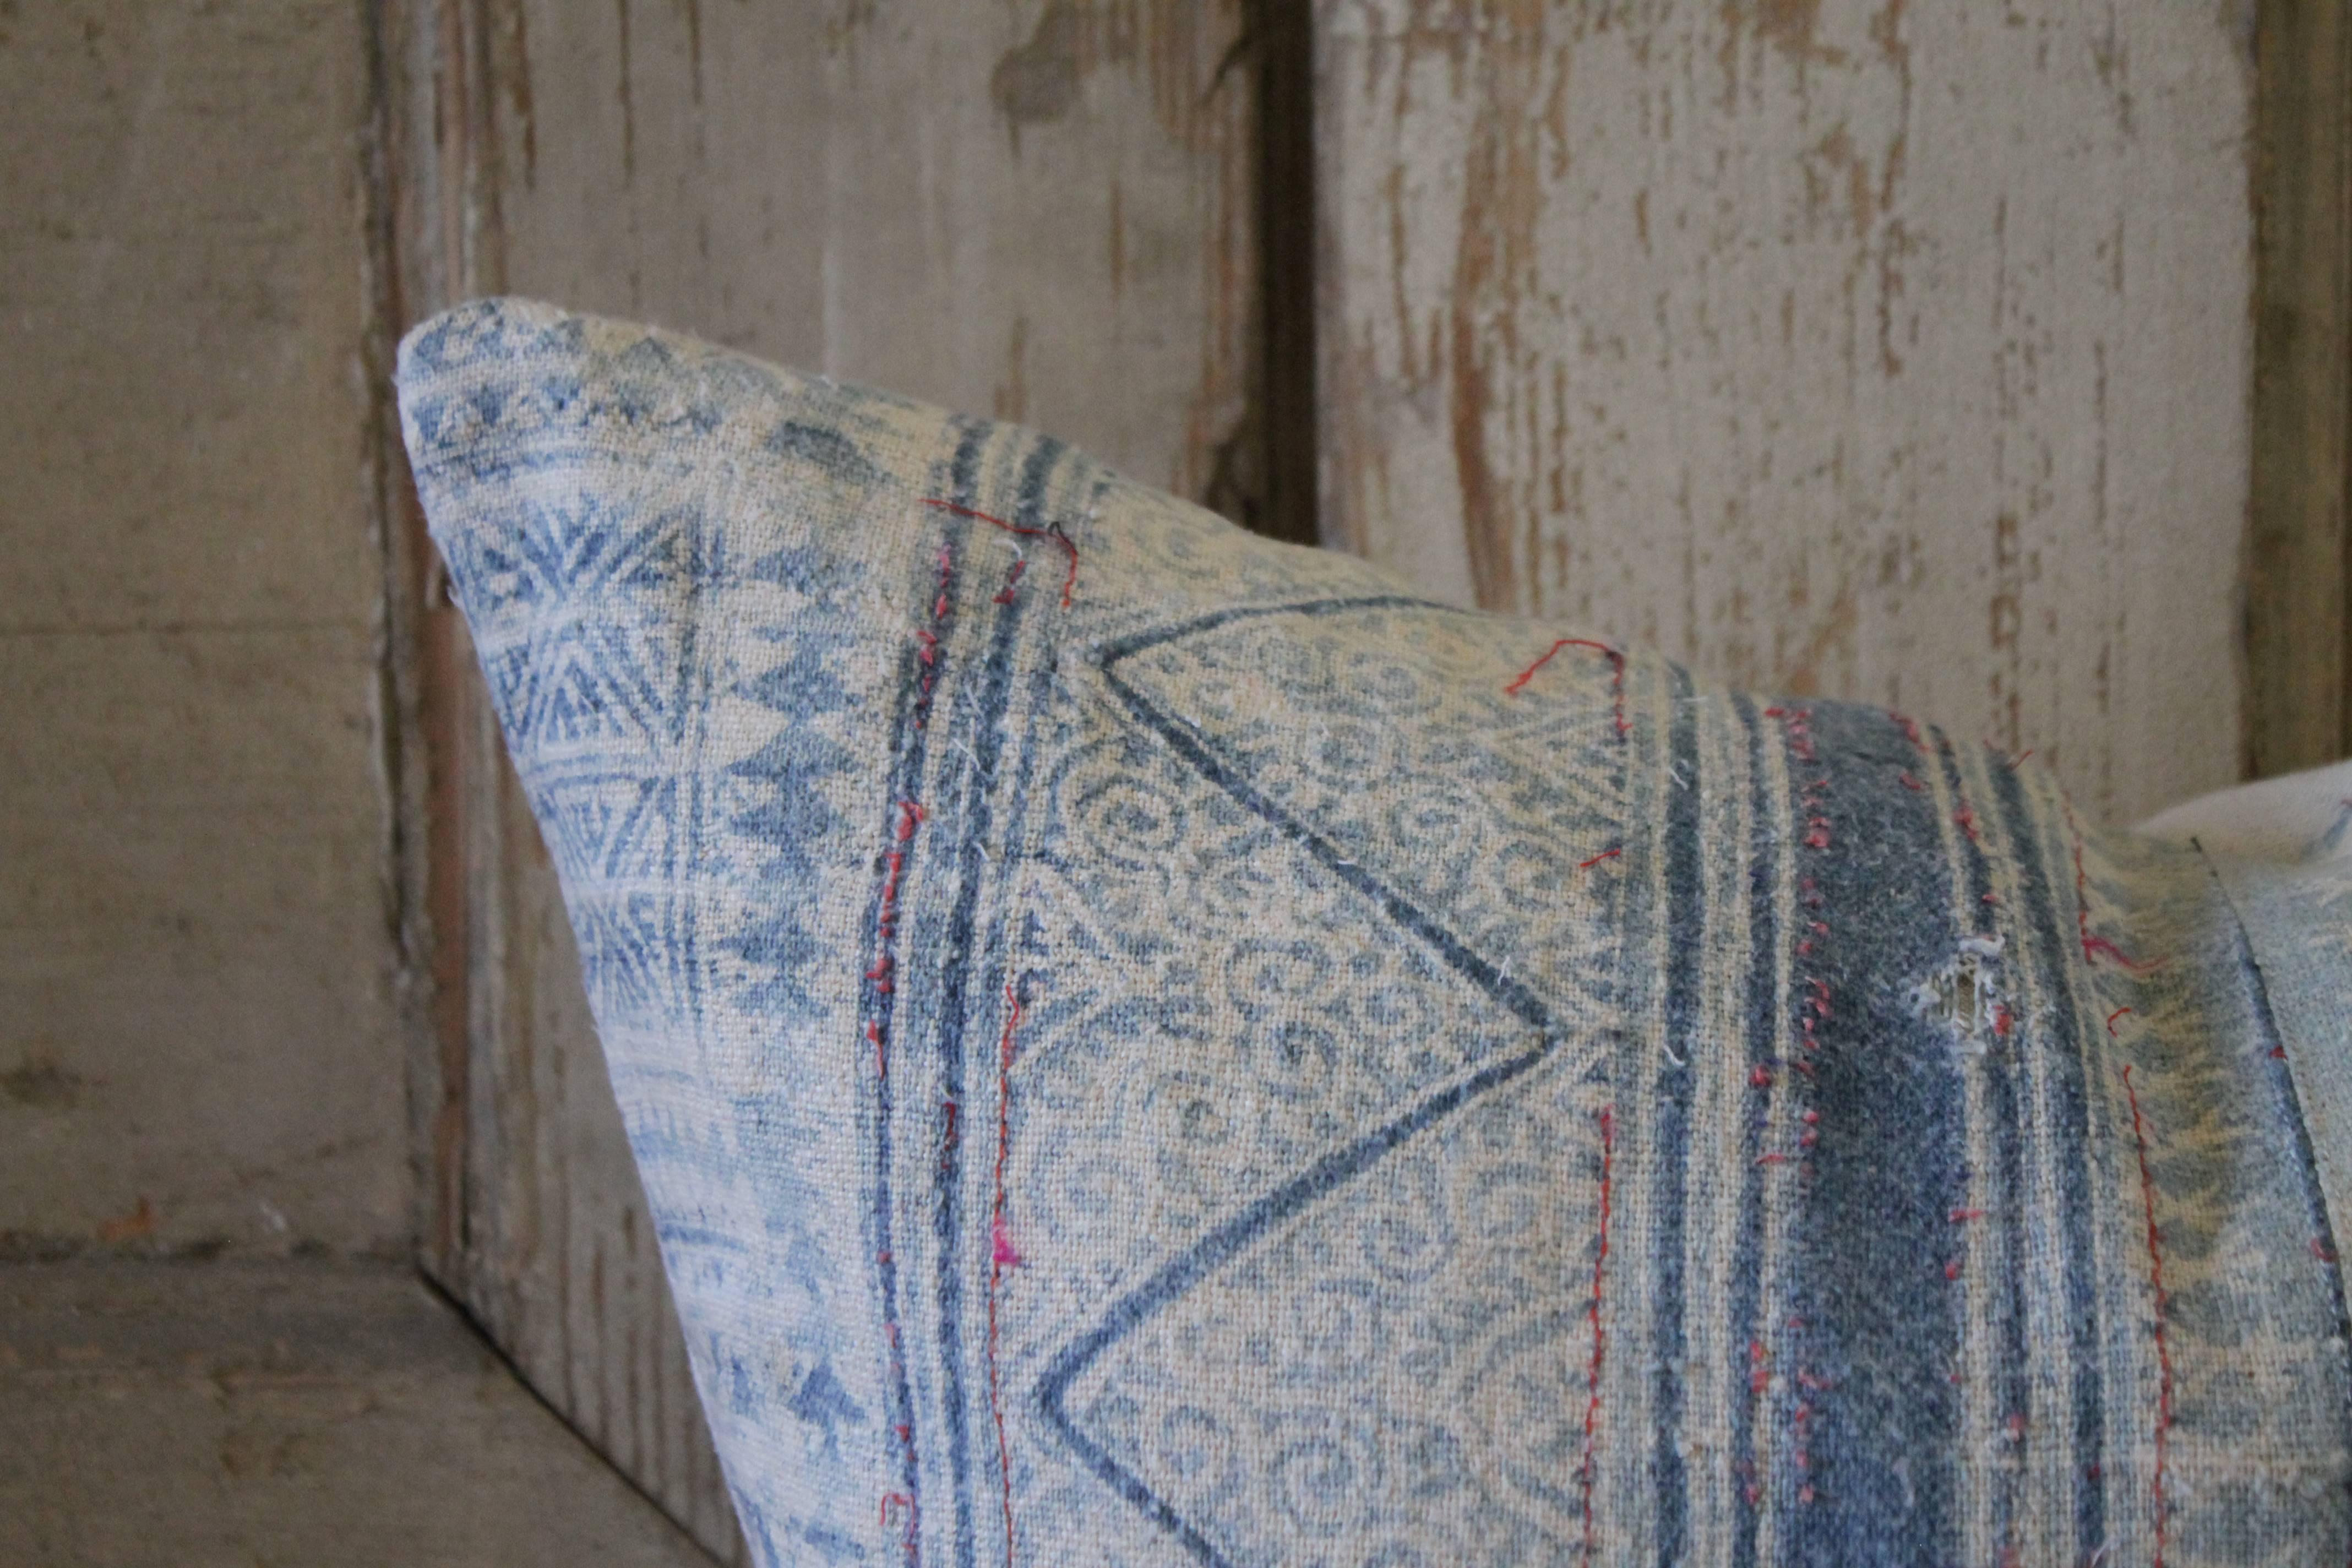 A beautiful light blue batik pattern, these pillows are custom-made in our studios from vintage textiles. The front of the pillow are a beautiful pattern, with light and dark blue patterns, on a nubby thick textural fabric. There are accents of a